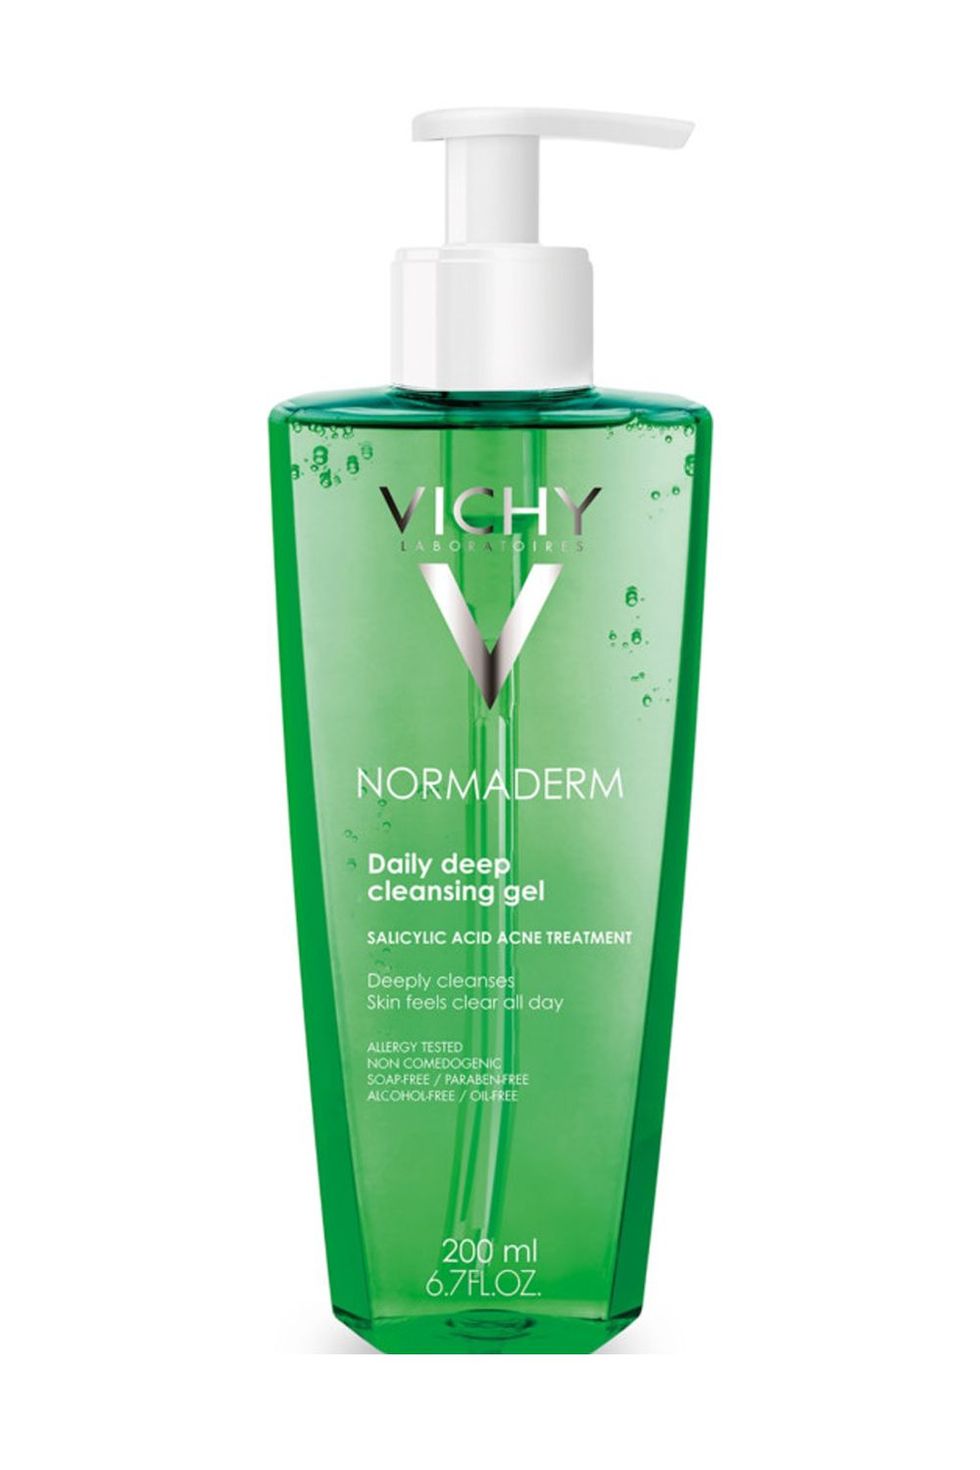 Normaderm gel purifiant. Vichy Normaderm. Vichy Normaderm 200 ml. Vichy Normaderm гель для умывания. Vichy Normaderm phytosolution Gel purifiant.